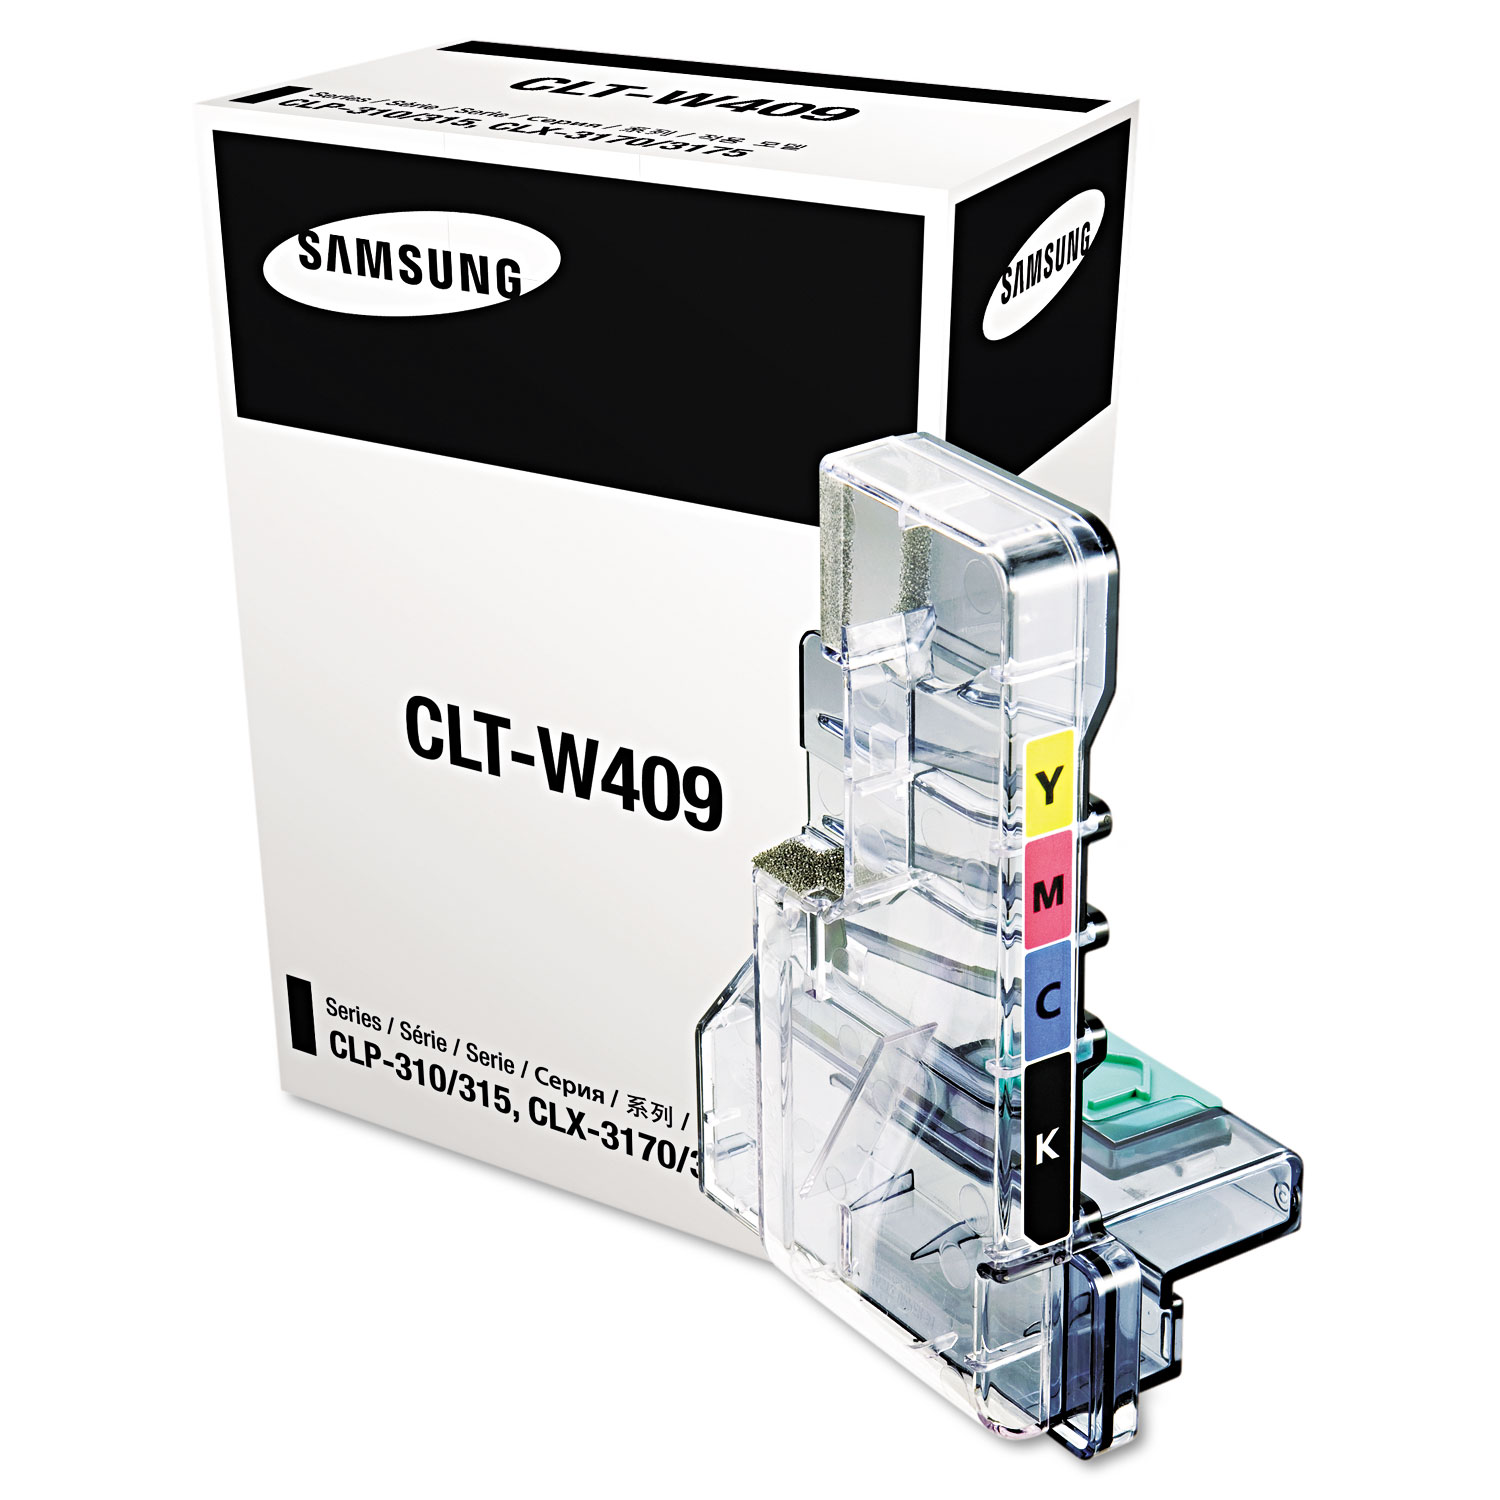 Waste Toner Cartridge for Samsung CLP-315, CLX-3170 Series, 2500 Page Yield